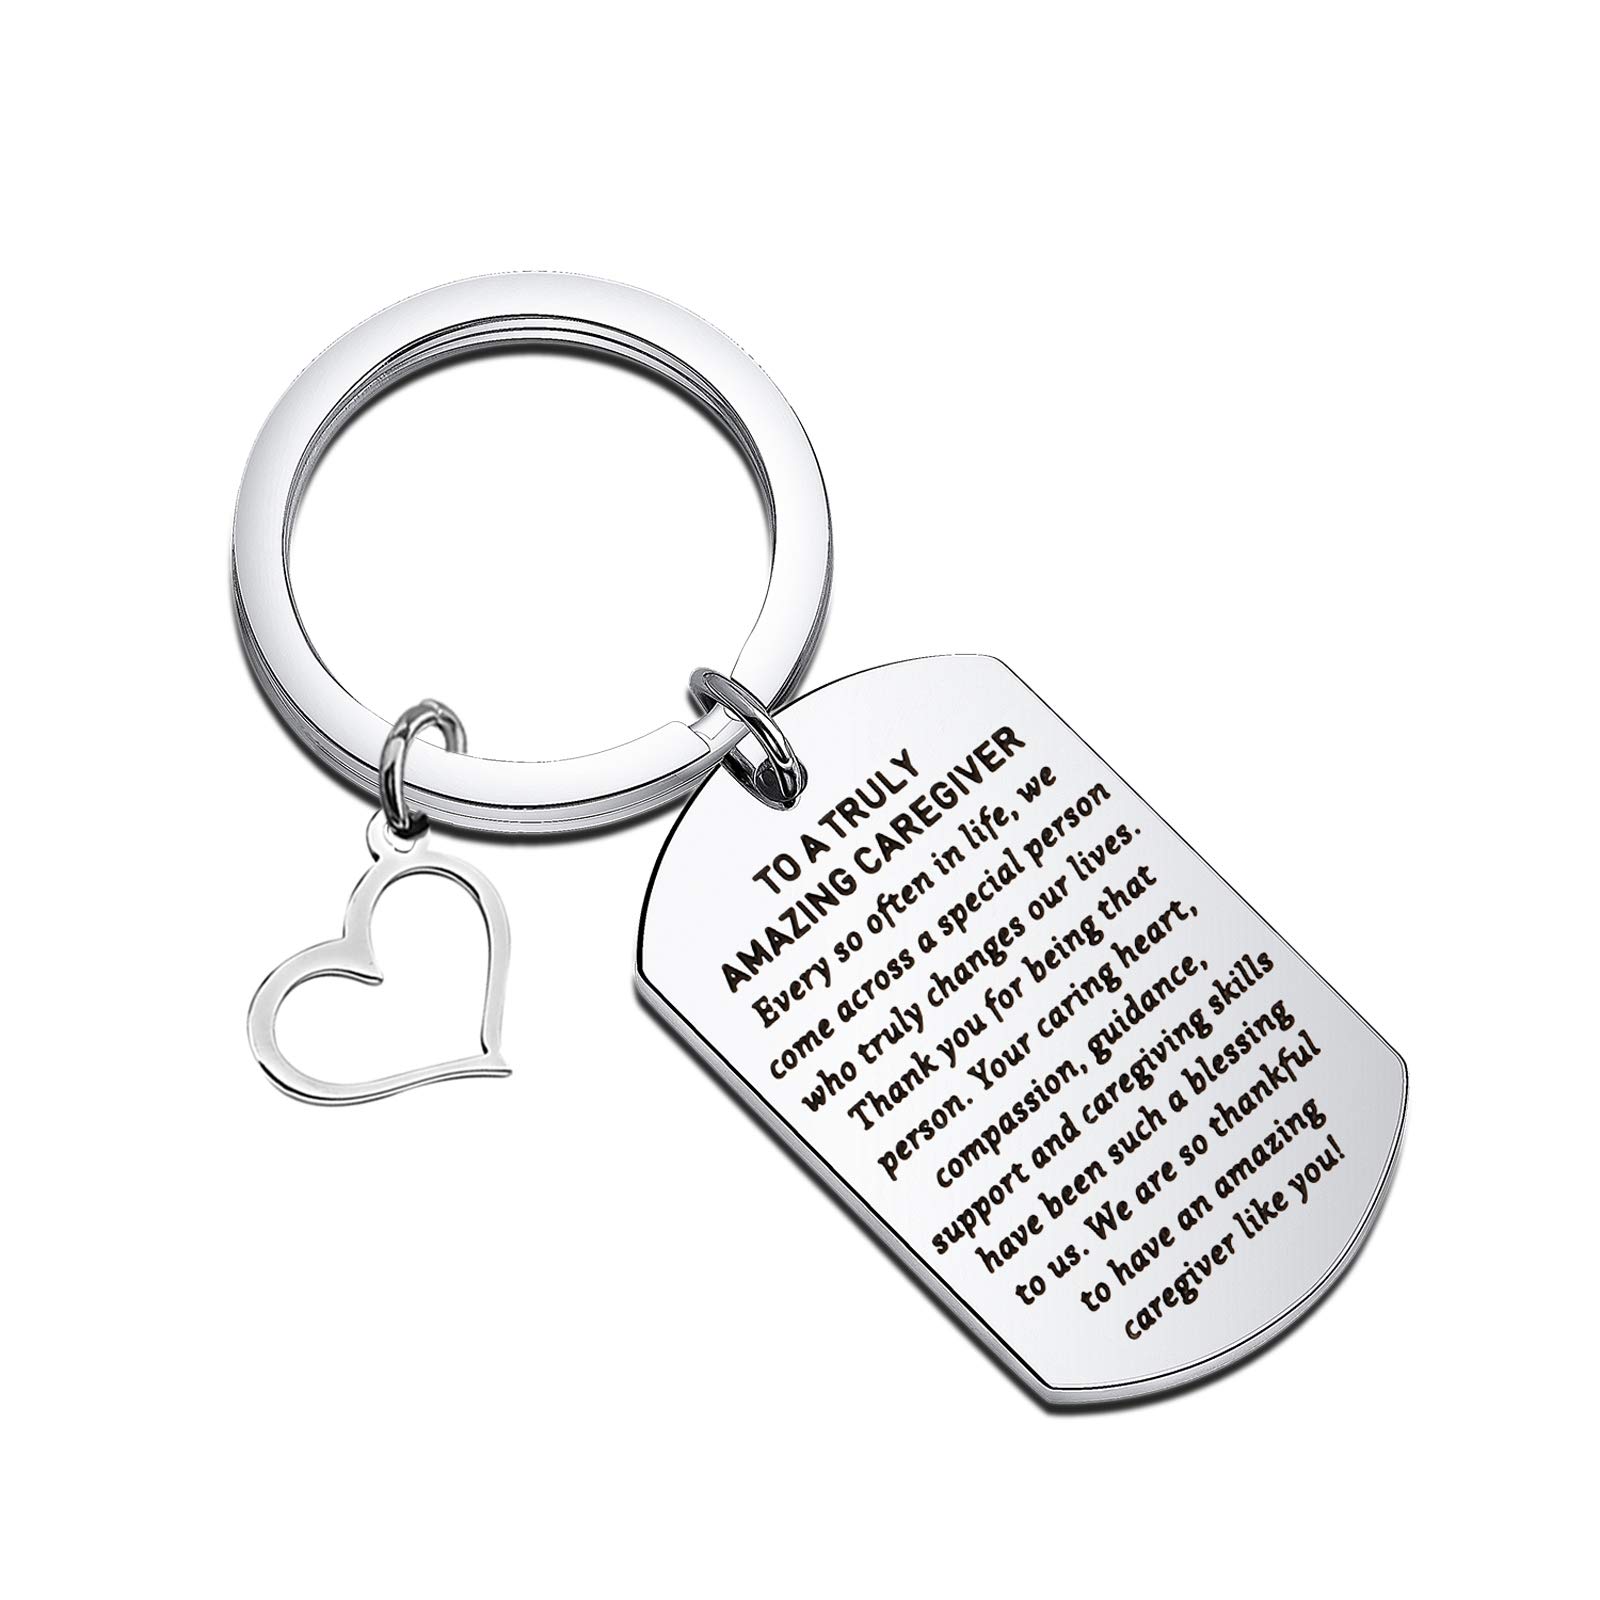 CENWA Caregivers Gifts Thank You Gift for Caregivers Caretakers Gifts to A Truly Great Caregiver Keychain